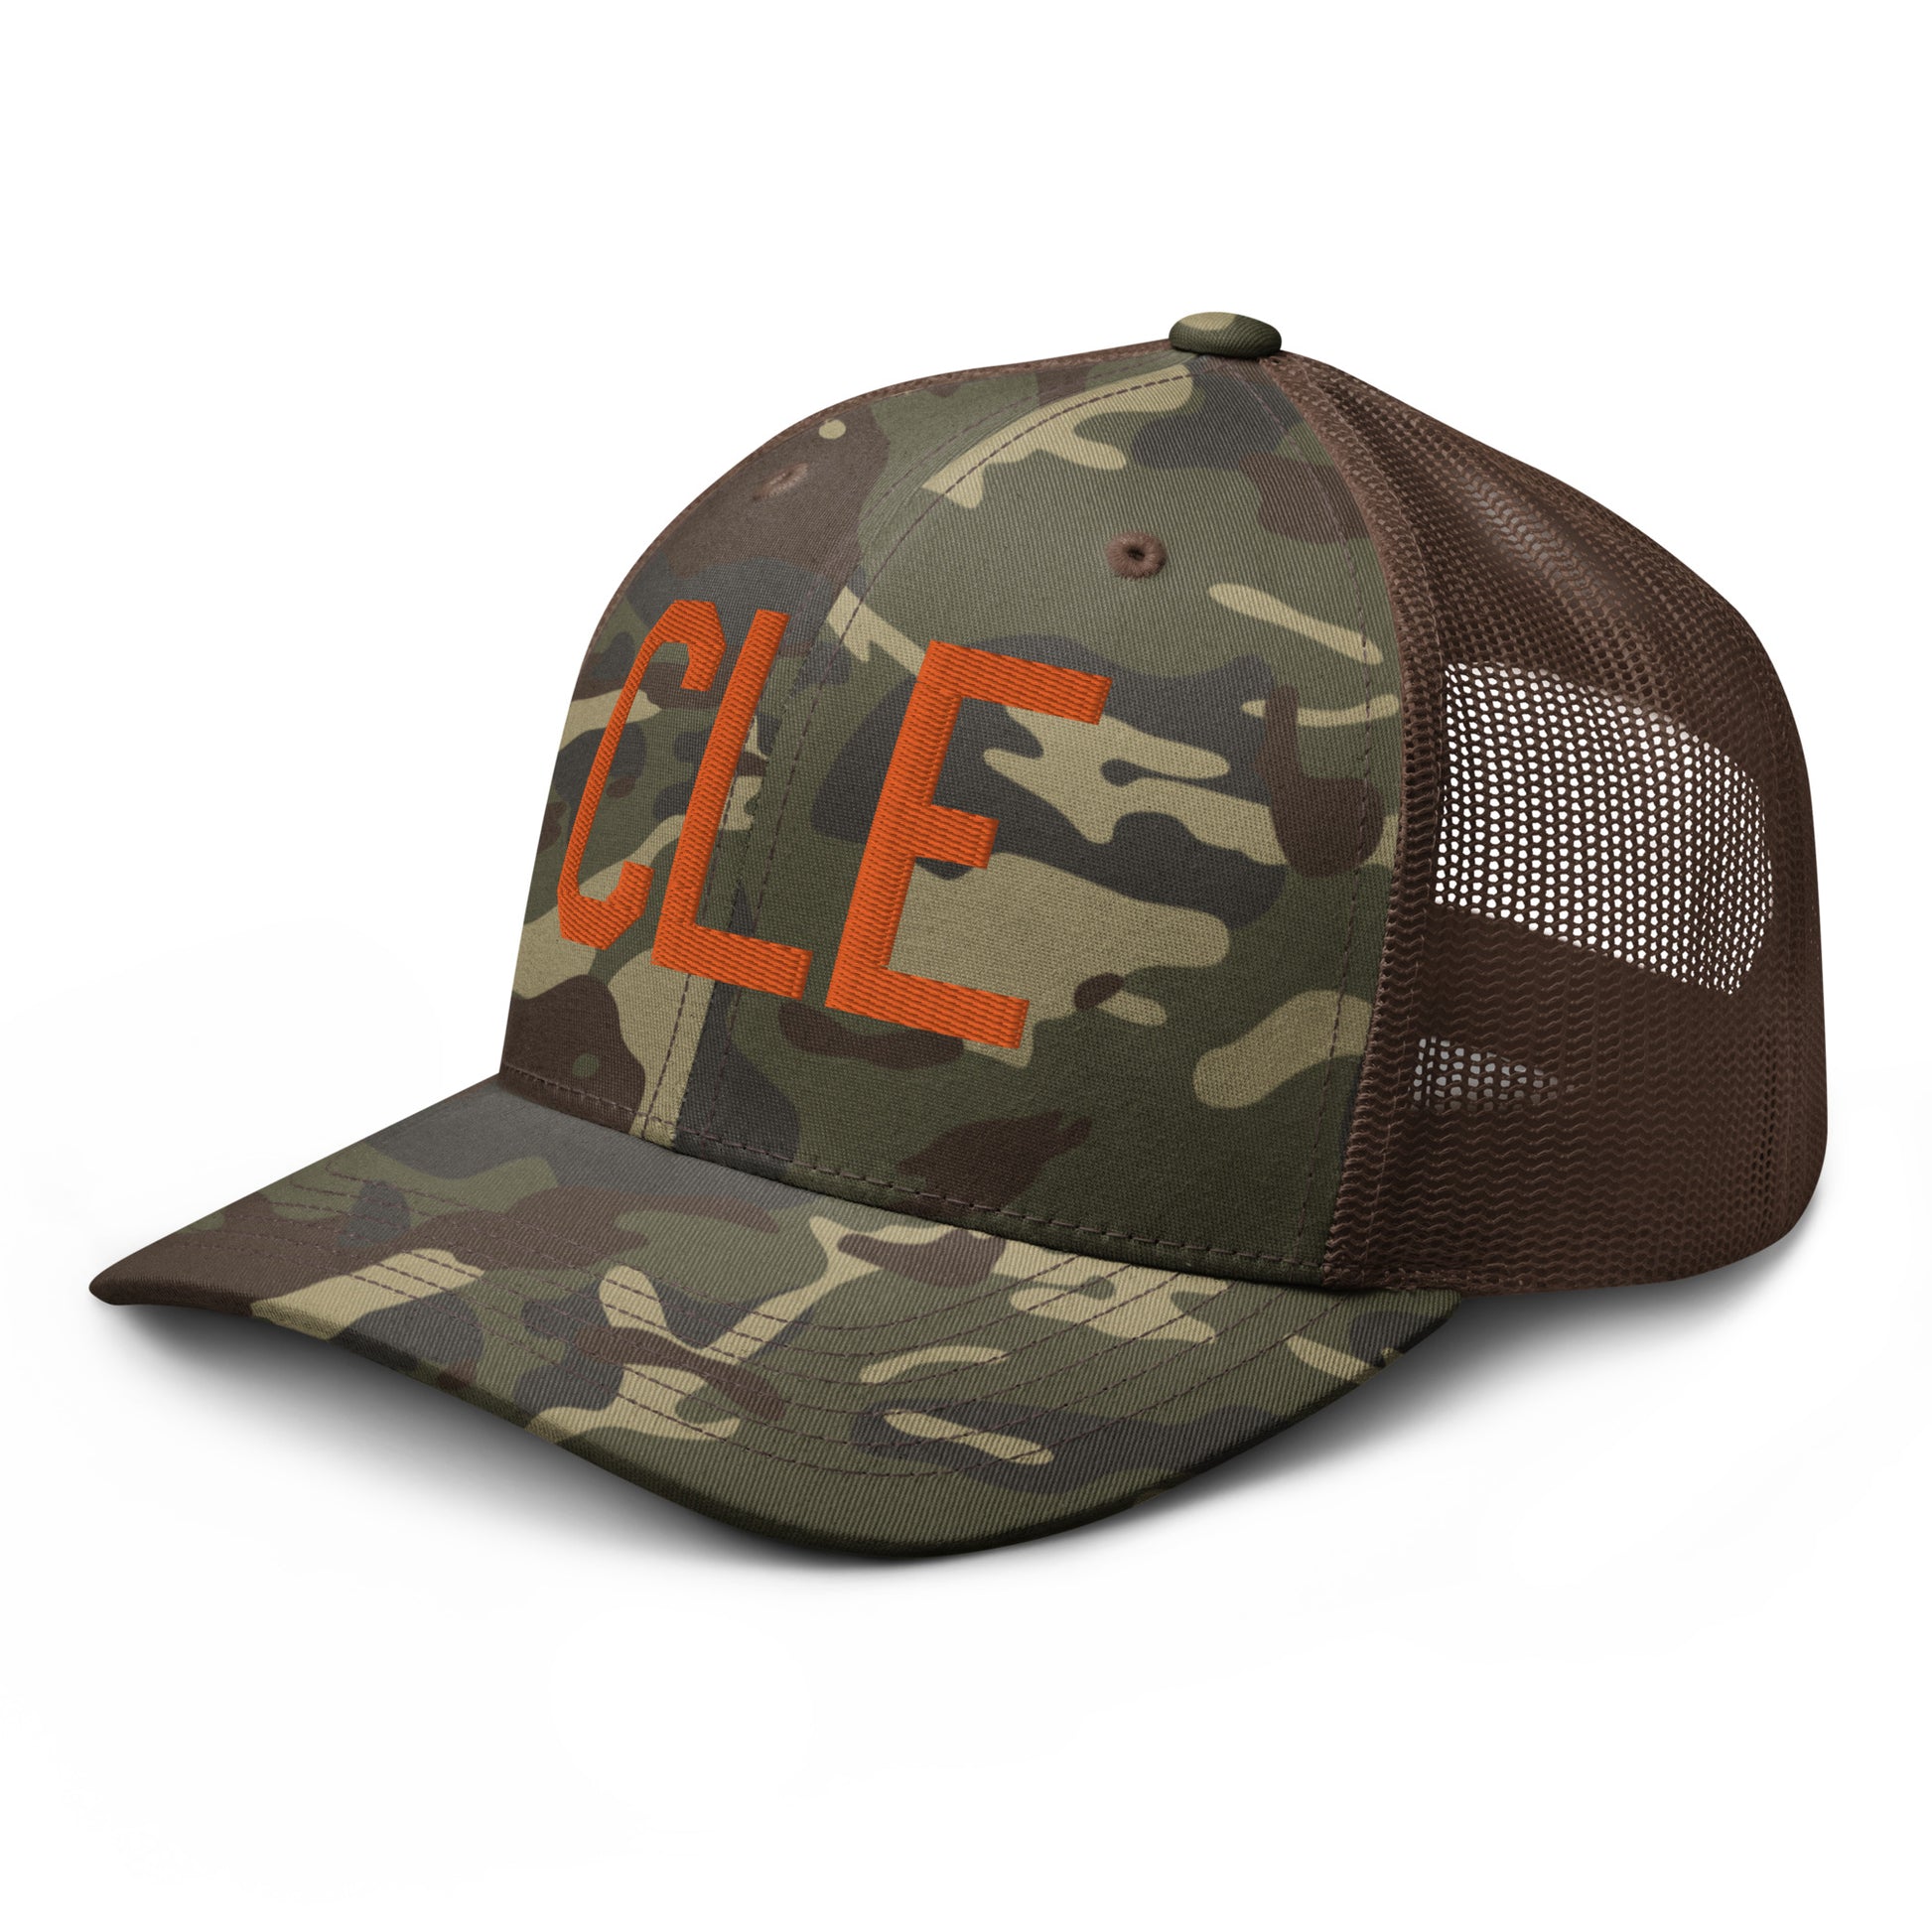 Airport Code Camouflage Trucker Hat - Orange • CLE Cleveland • YHM Designs - Image 15